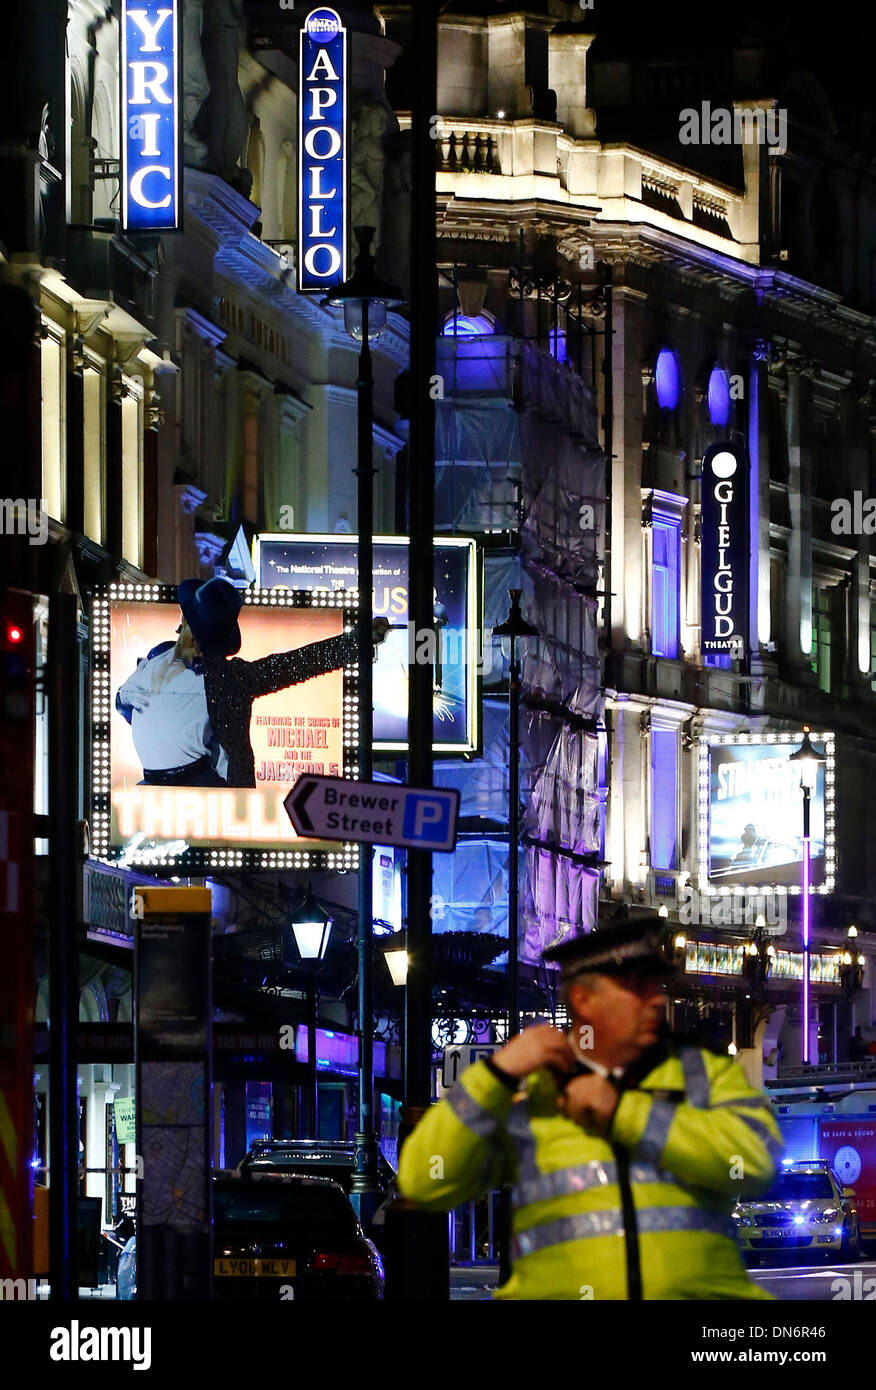 London. 20th Dec, 2013. Rescuers work at the site of a roof collapse at a theatre in central London on Dec. 19, 2013. Some 88 people were injured, including 7 serious cases, after part of the roof in London's Apollo Theatre collapsed on Thursday. Credit:  Yin Gang/Xinhua/Alamy Live News Stock Photo